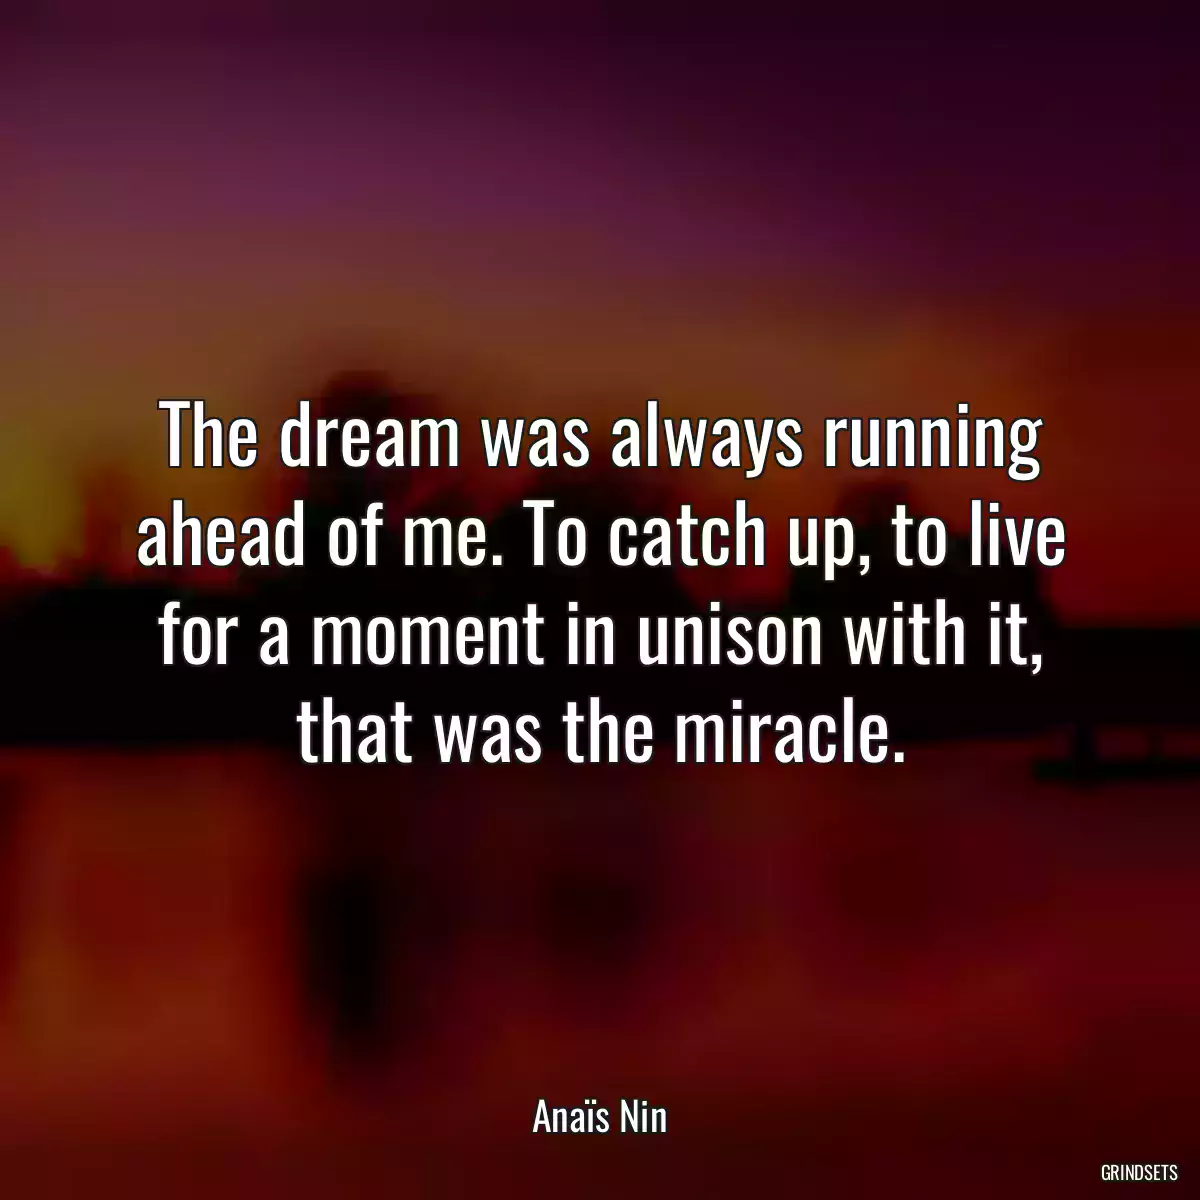 The dream was always running ahead of me. To catch up, to live for a moment in unison with it, that was the miracle.